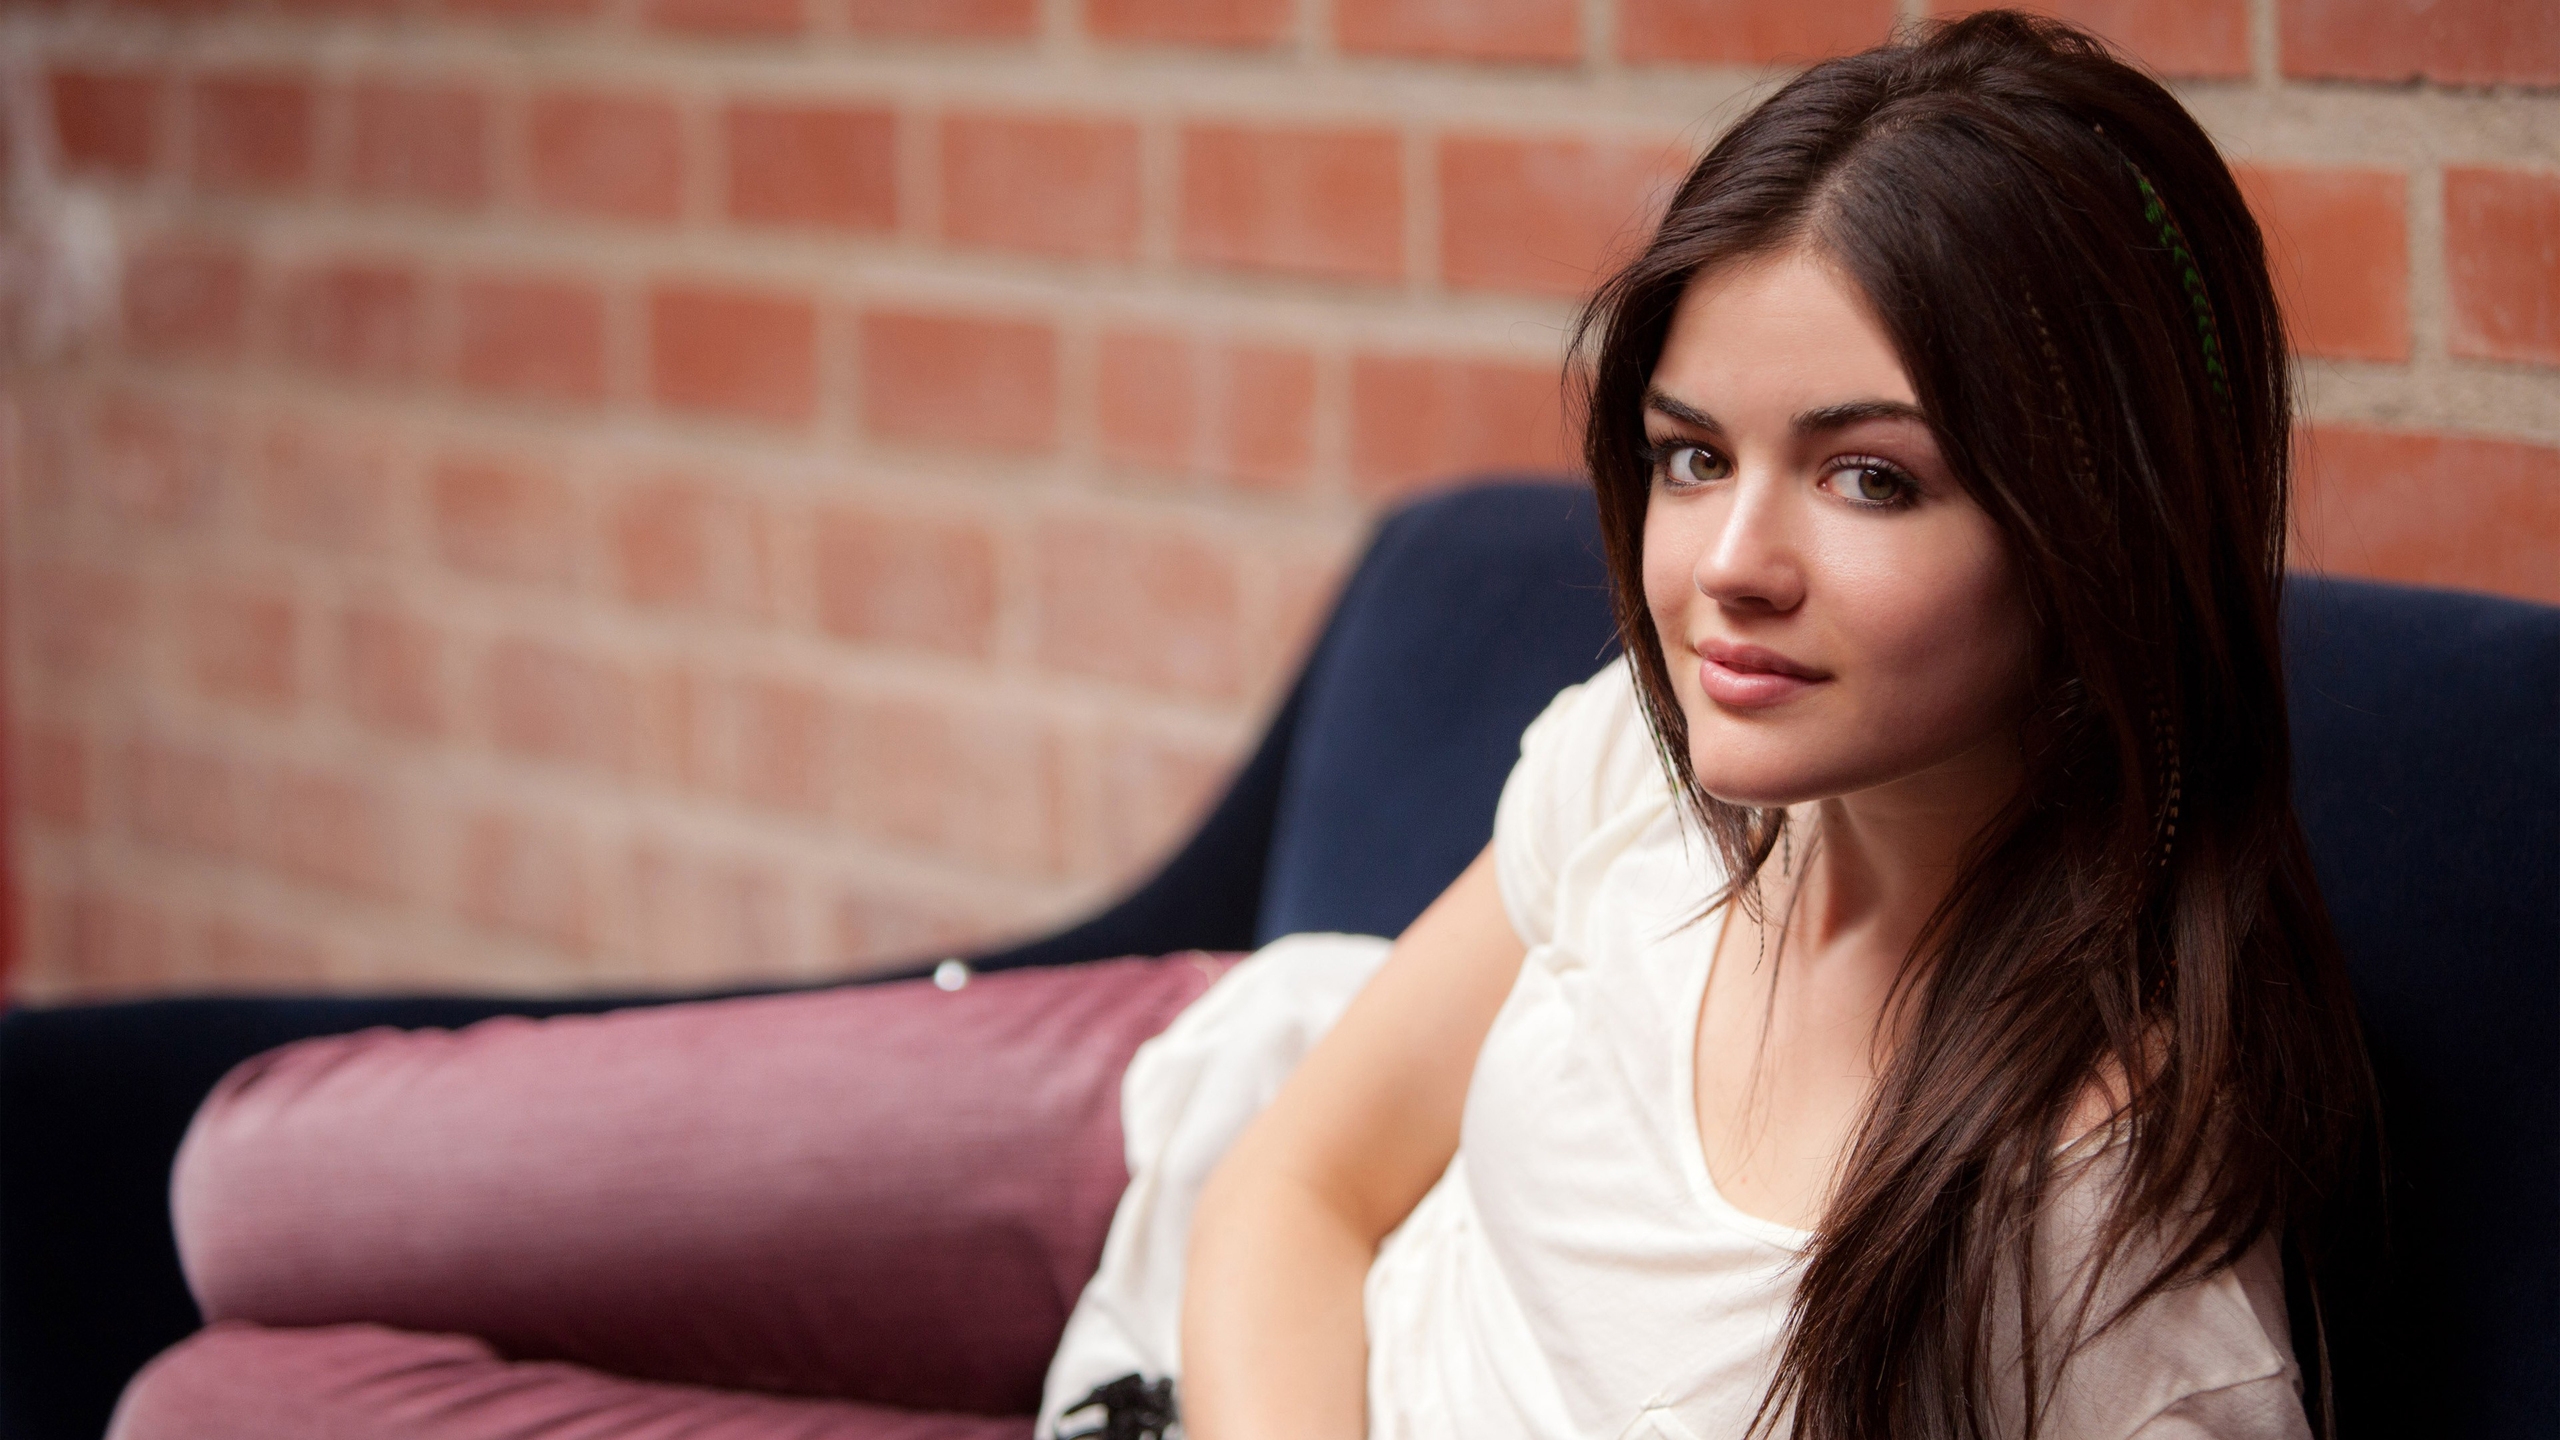 Lucy Hale Relaxing for 2560x1440 HDTV resolution